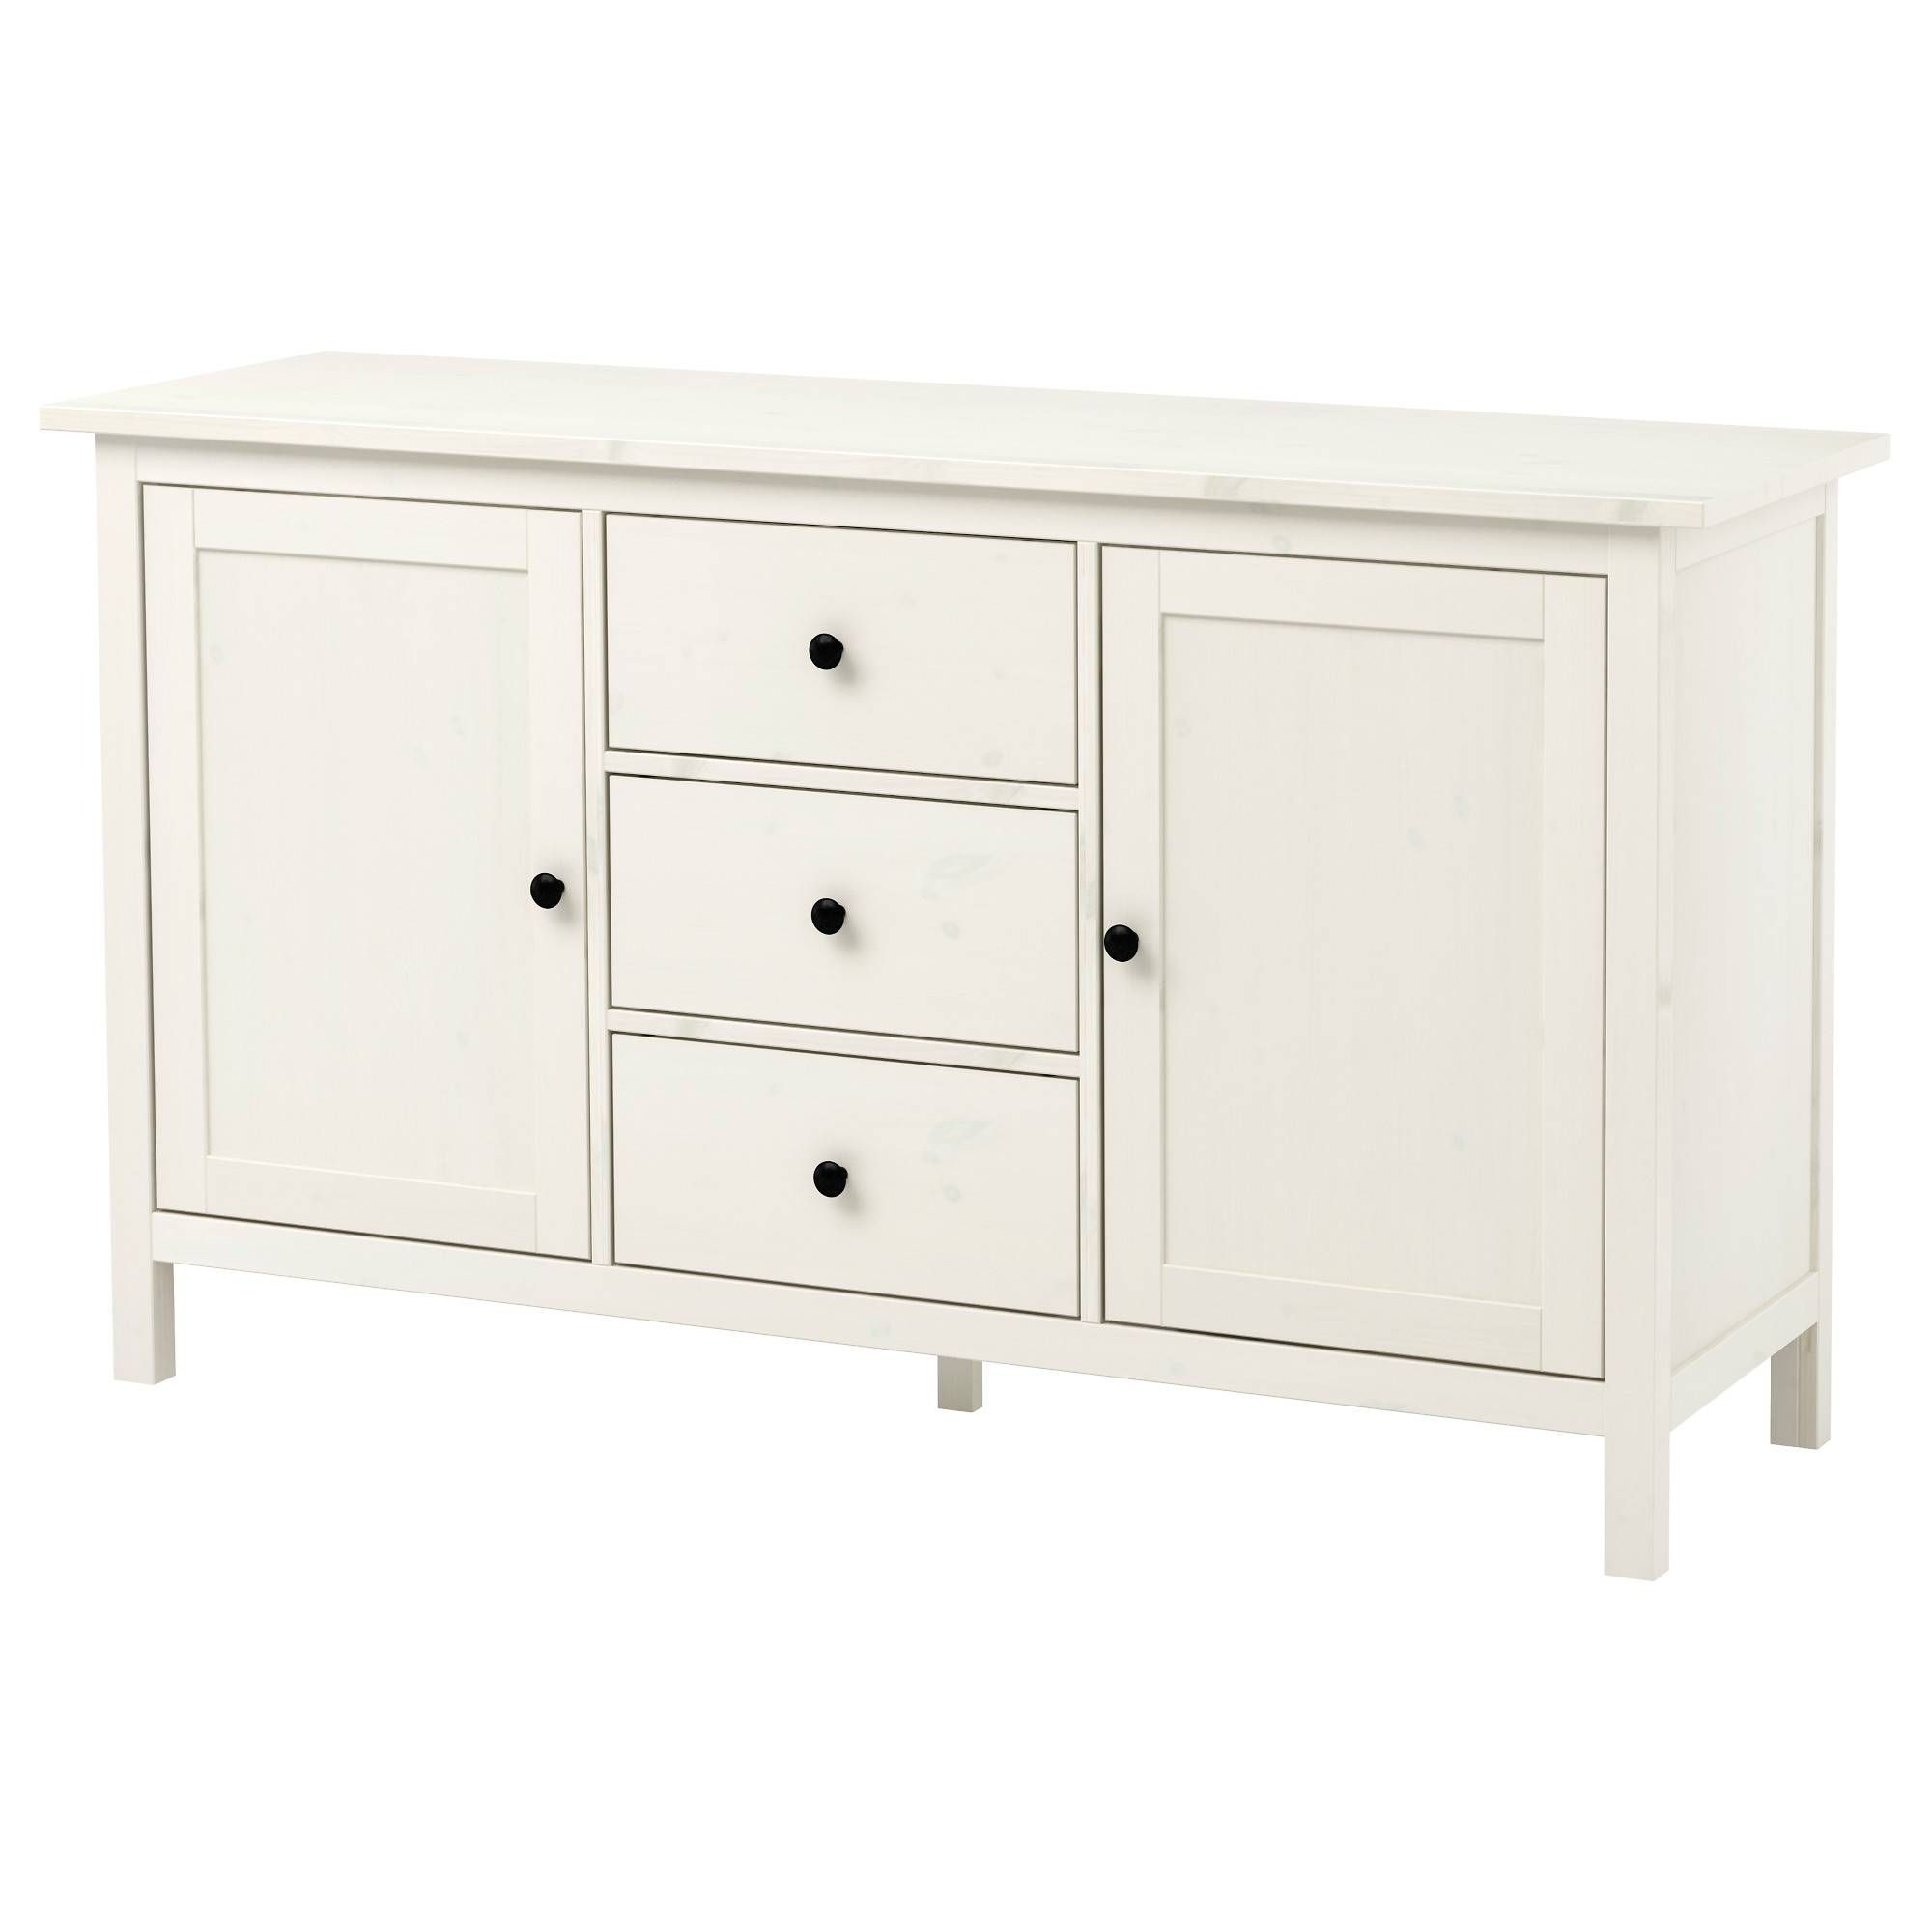 Hemnes Sideboard – White Stain – Ikea Inside Most Recent Buffet Sideboards (View 2 of 15)